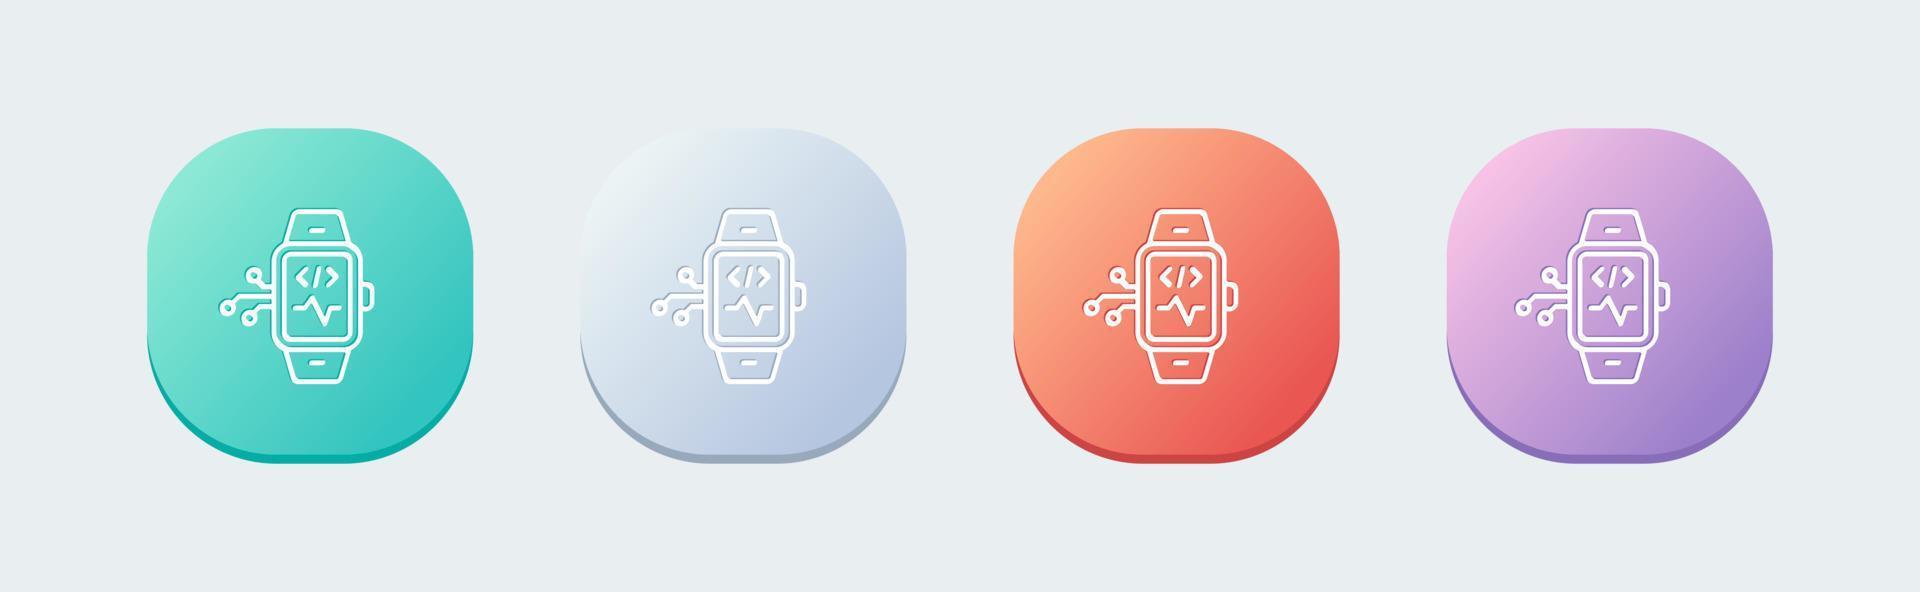 Smartwatch line icon in flat design style. Smart watch signs vector illustration.